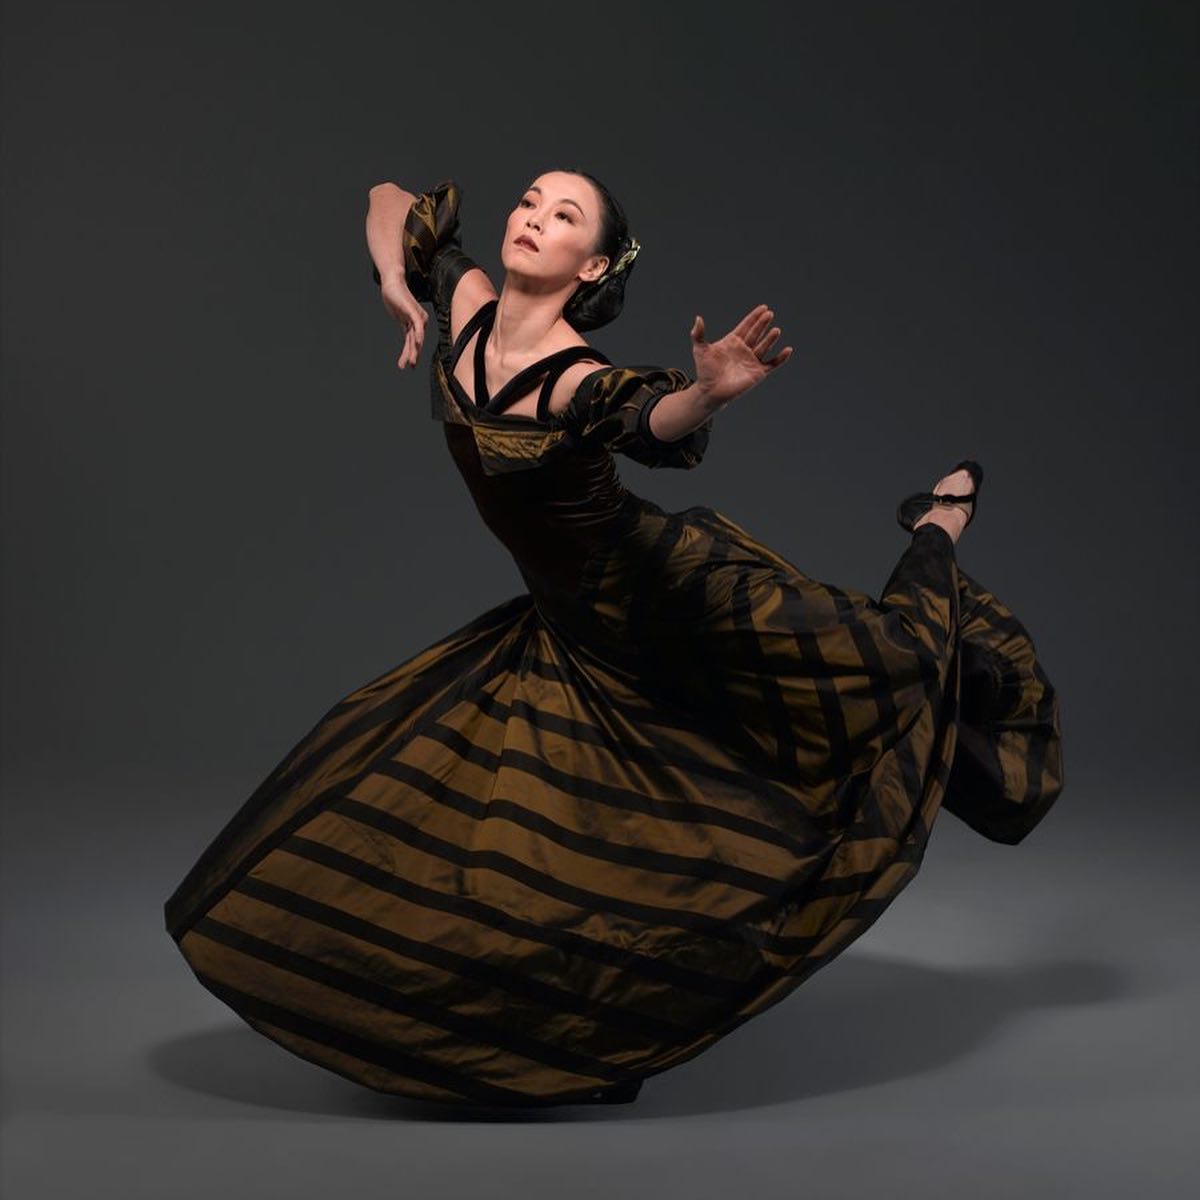 Miki Orihara, a Japenese woman, has her black hair pulled into a low bun. She is standing on one foot with one leg bent and extended behind her. She is holding her arms in a dance hold. She is wearing a floor length flamenco-style black and beige stripped tulle gown.